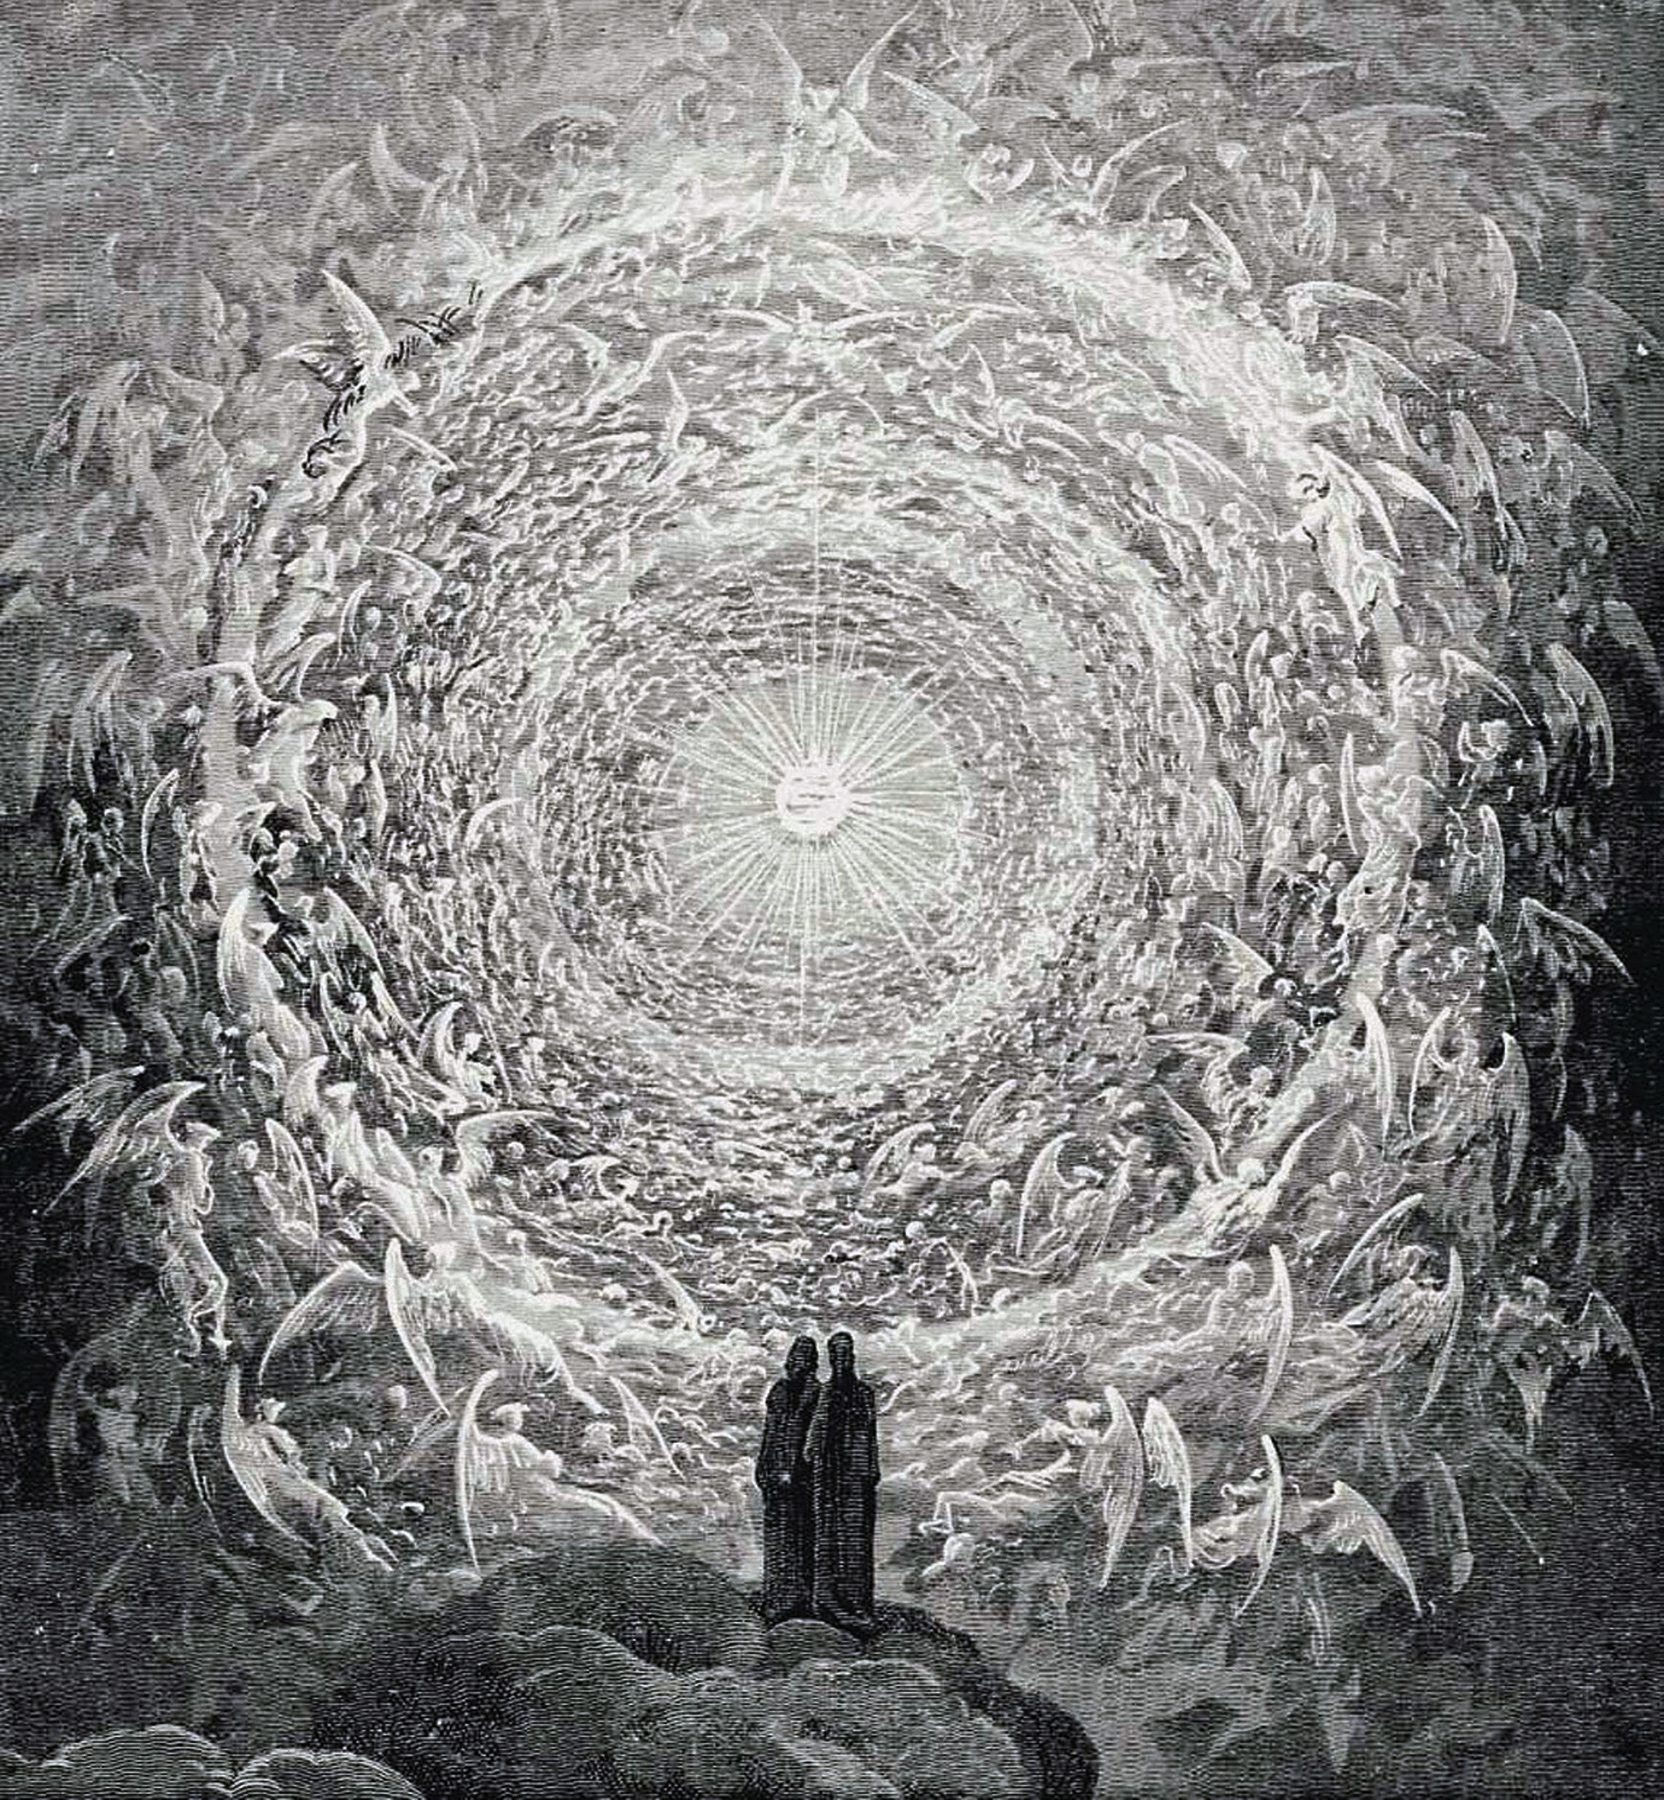 Paradiso, Canto 34 by Gustave Doré